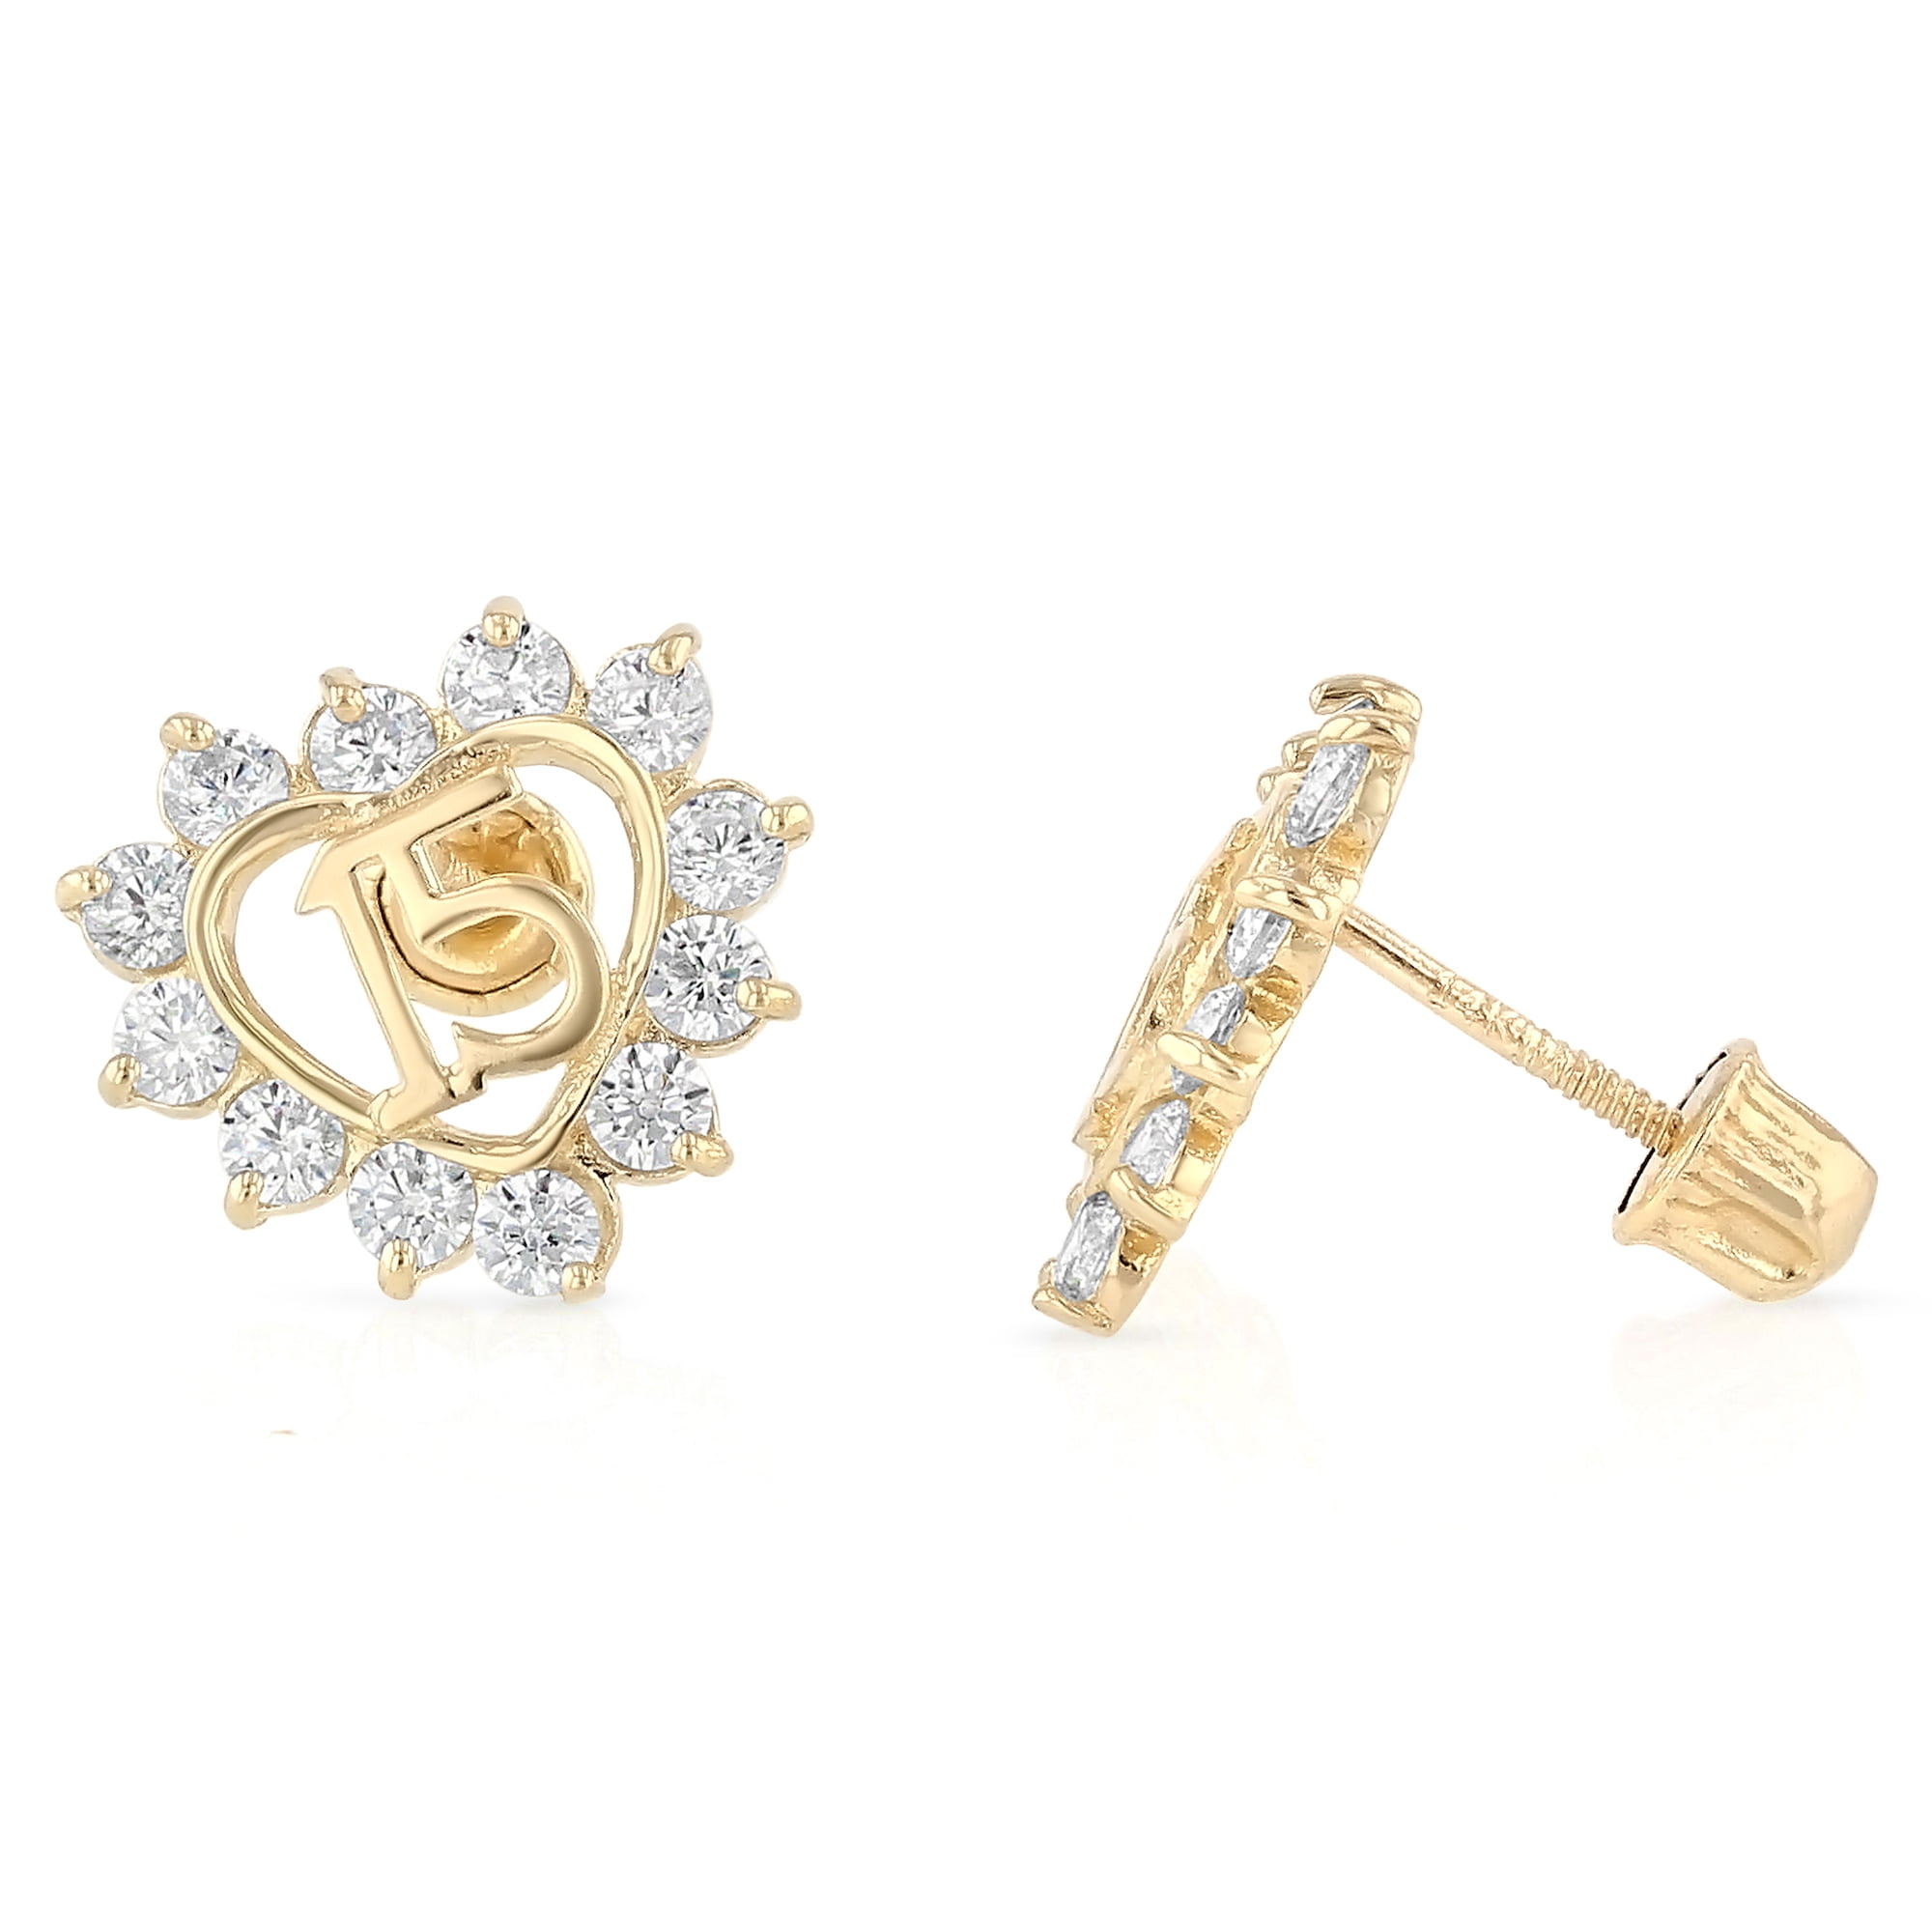 Details about   14K Yellow Gold Madi K Children's 6 MM CZ Heart Post Stud Earrings MSRP $108 